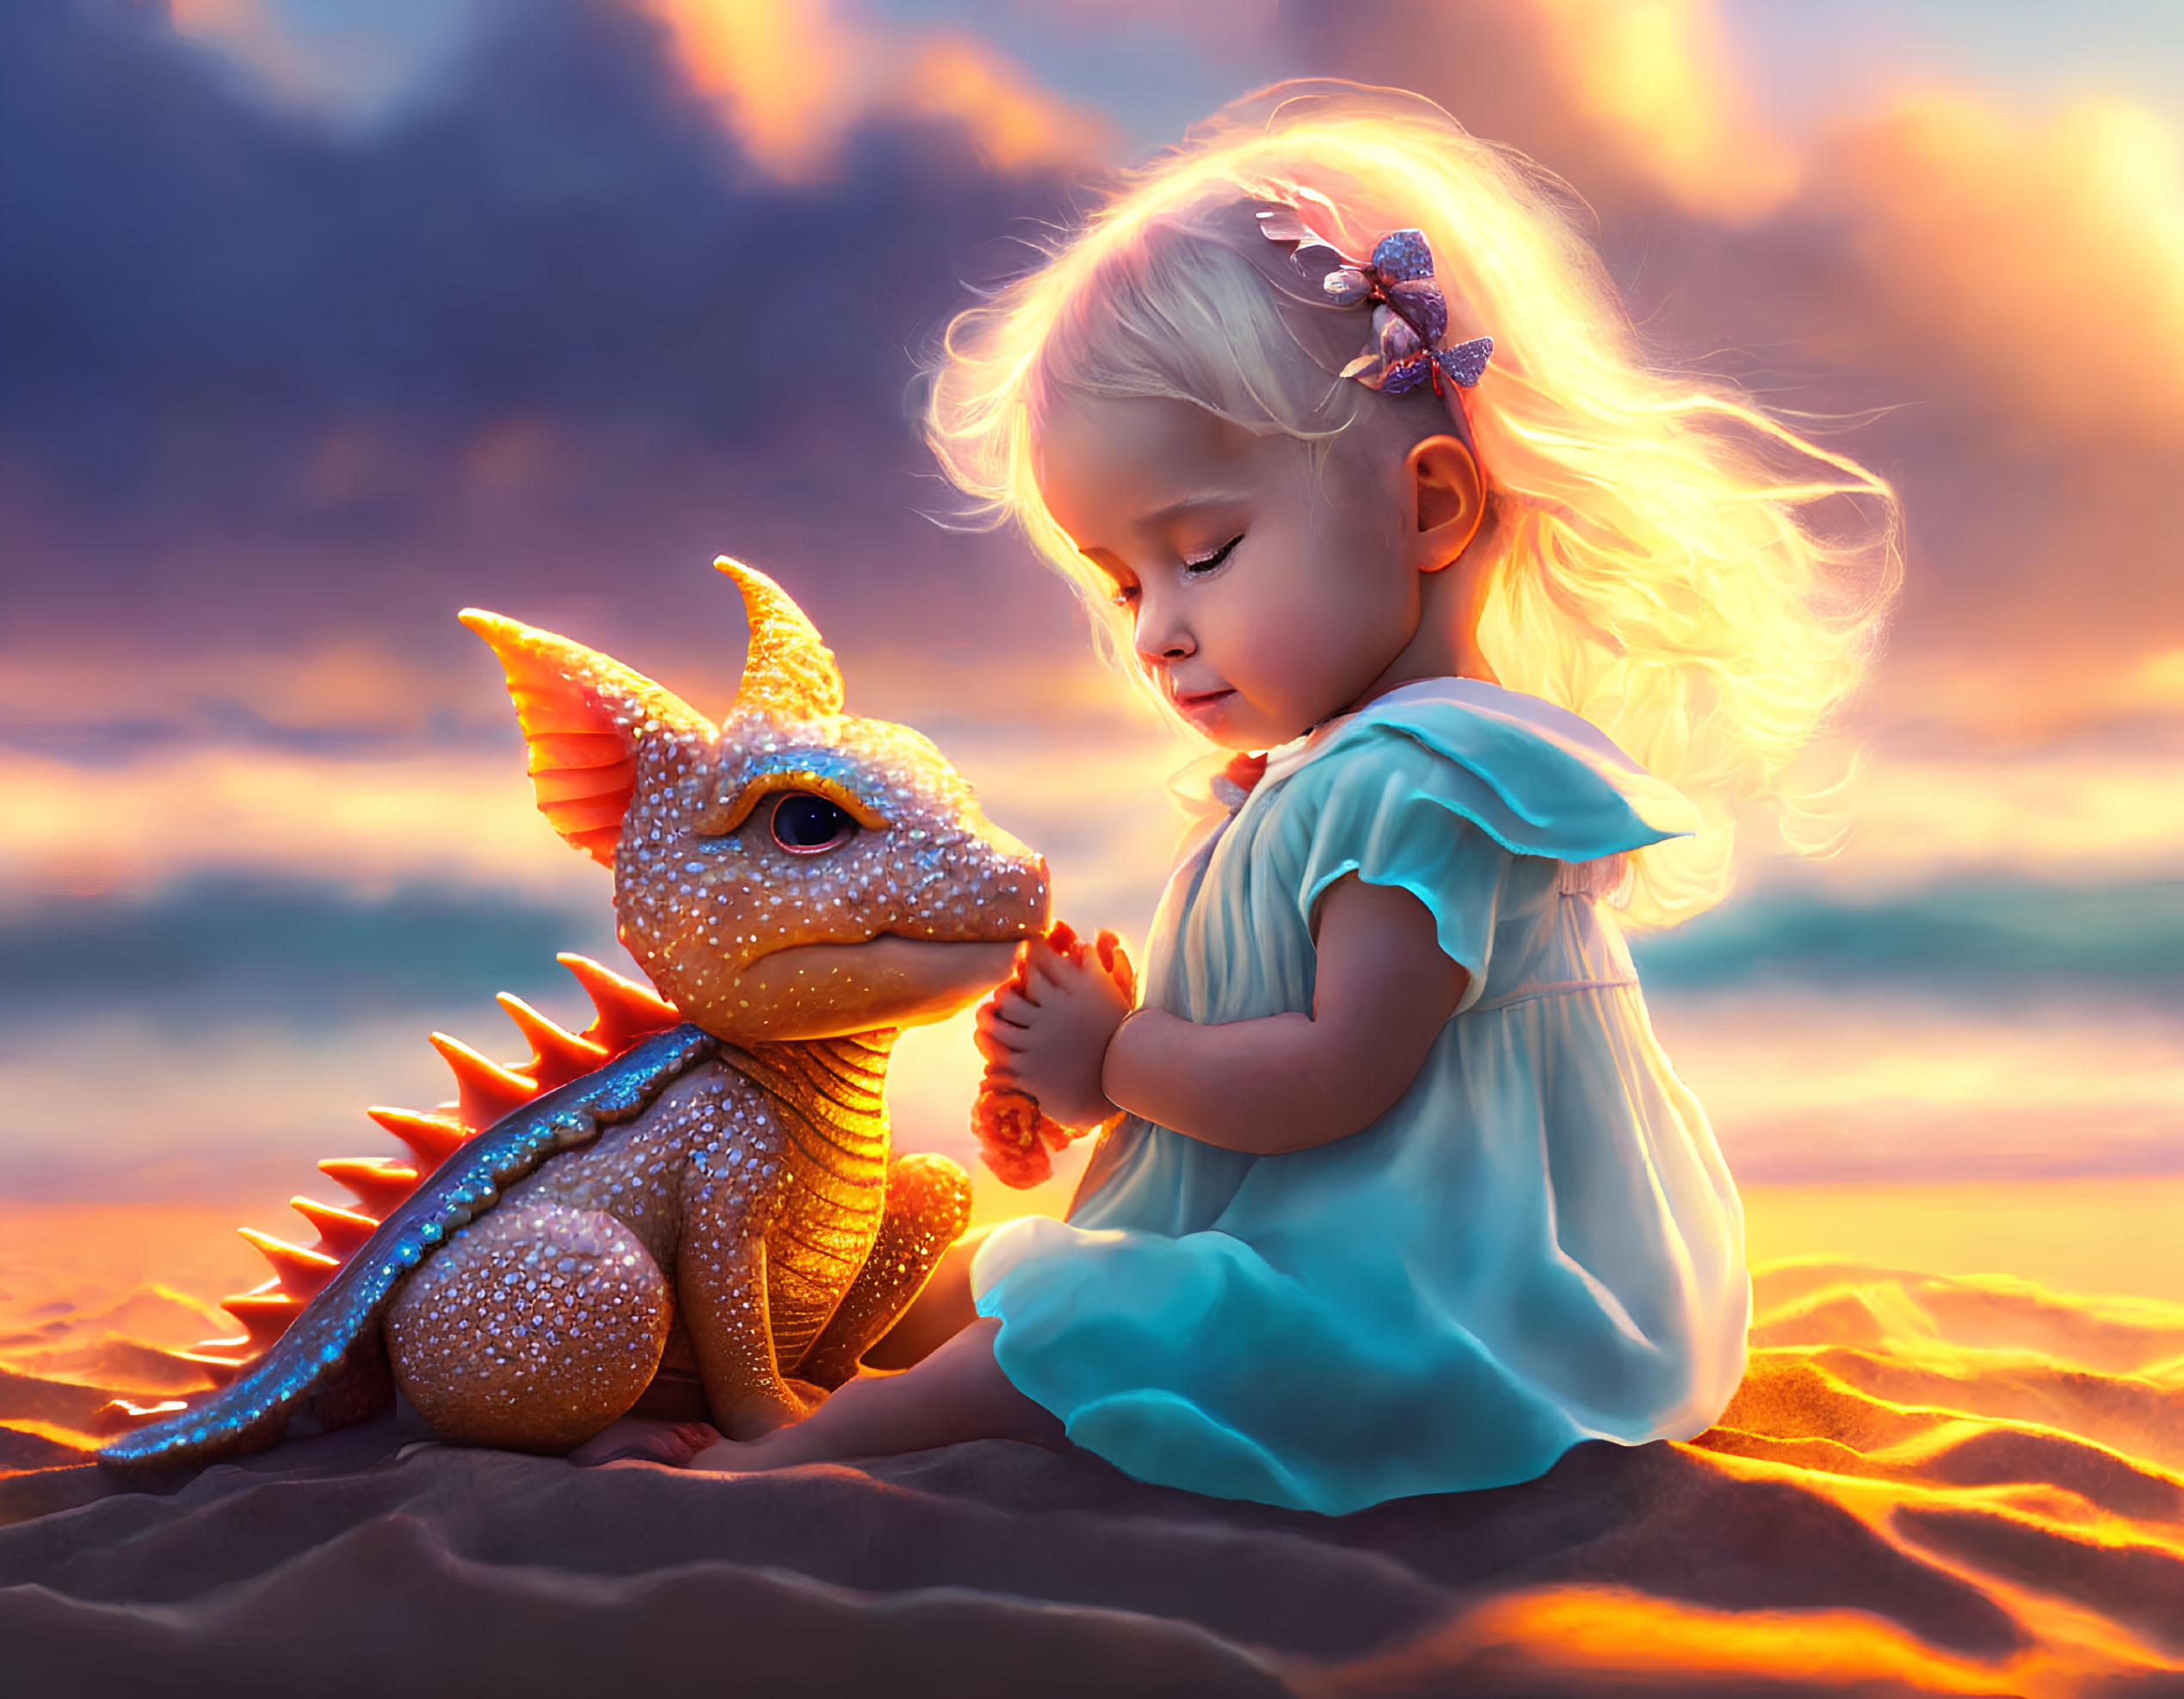 Young girl in blue dress with orange dragon on sandy beach at sunset